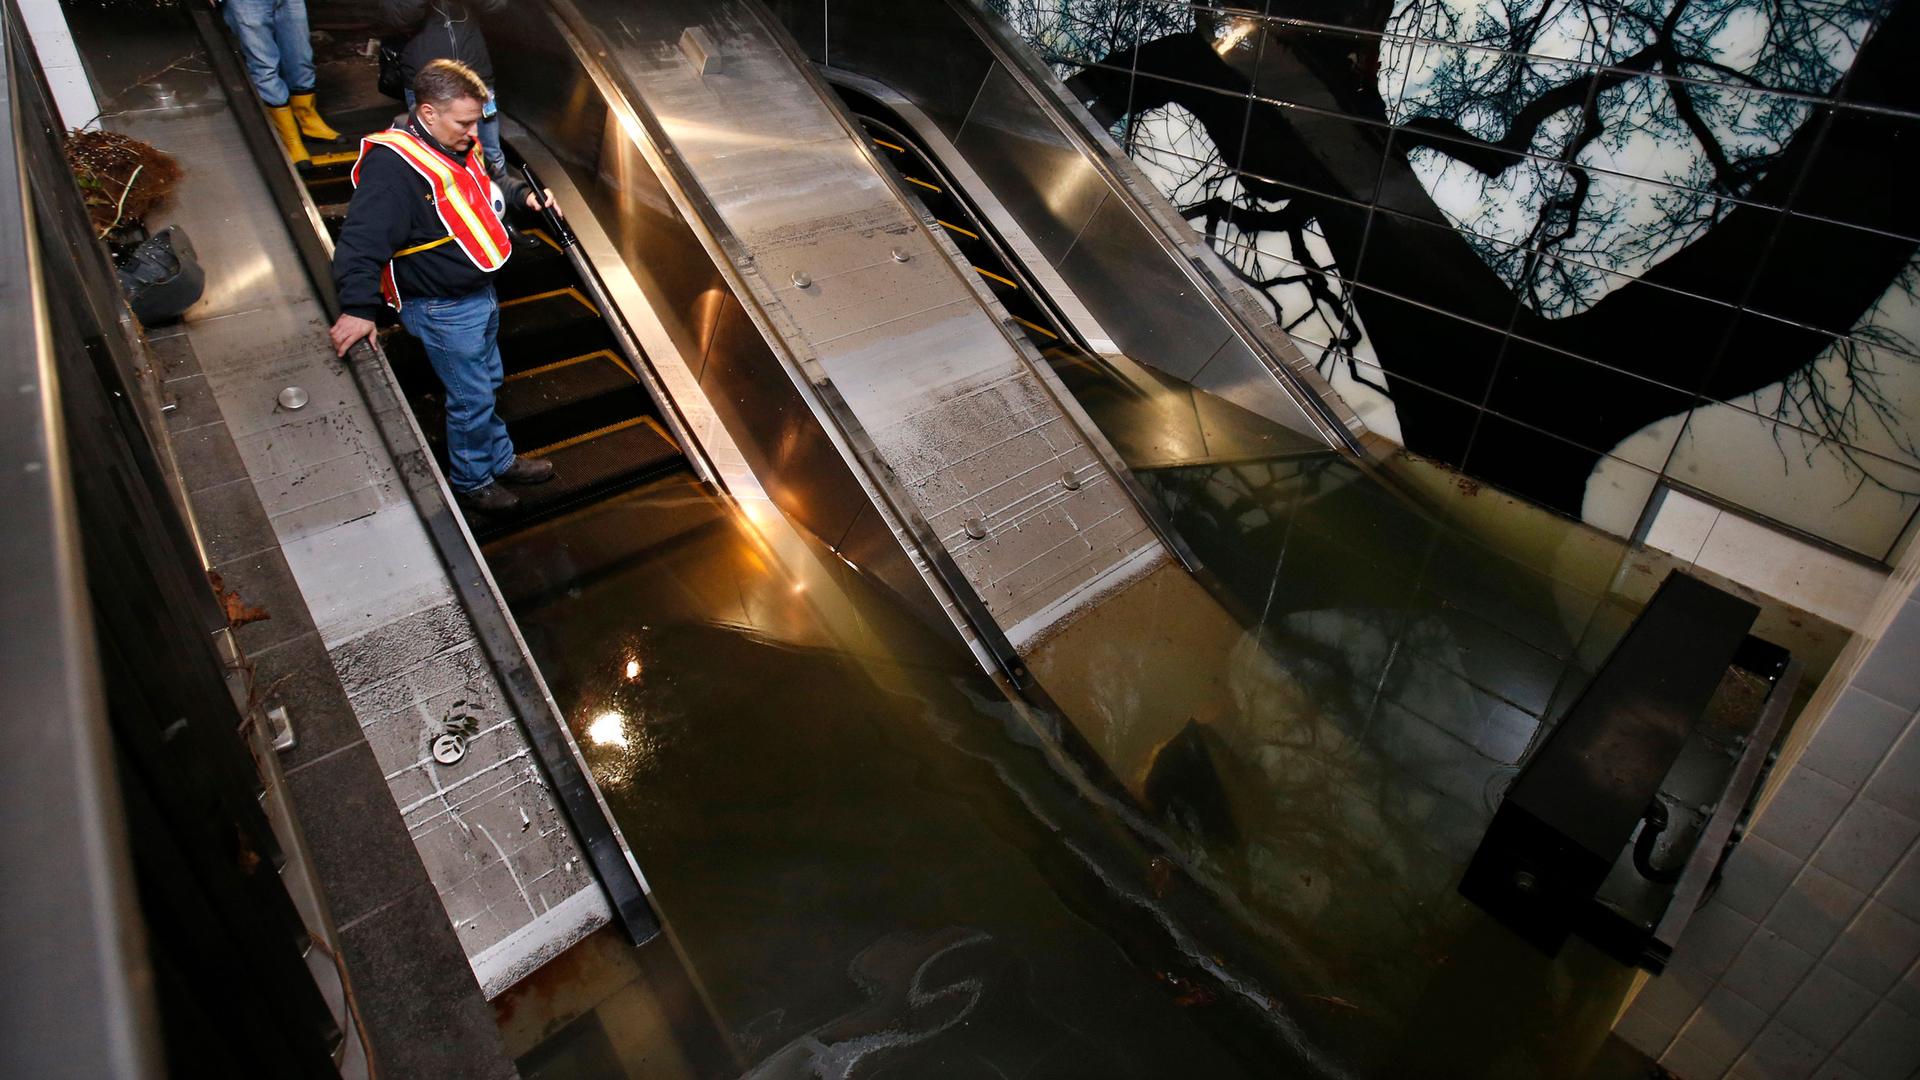 A man stands on an escalator looking down into a flooded subway station